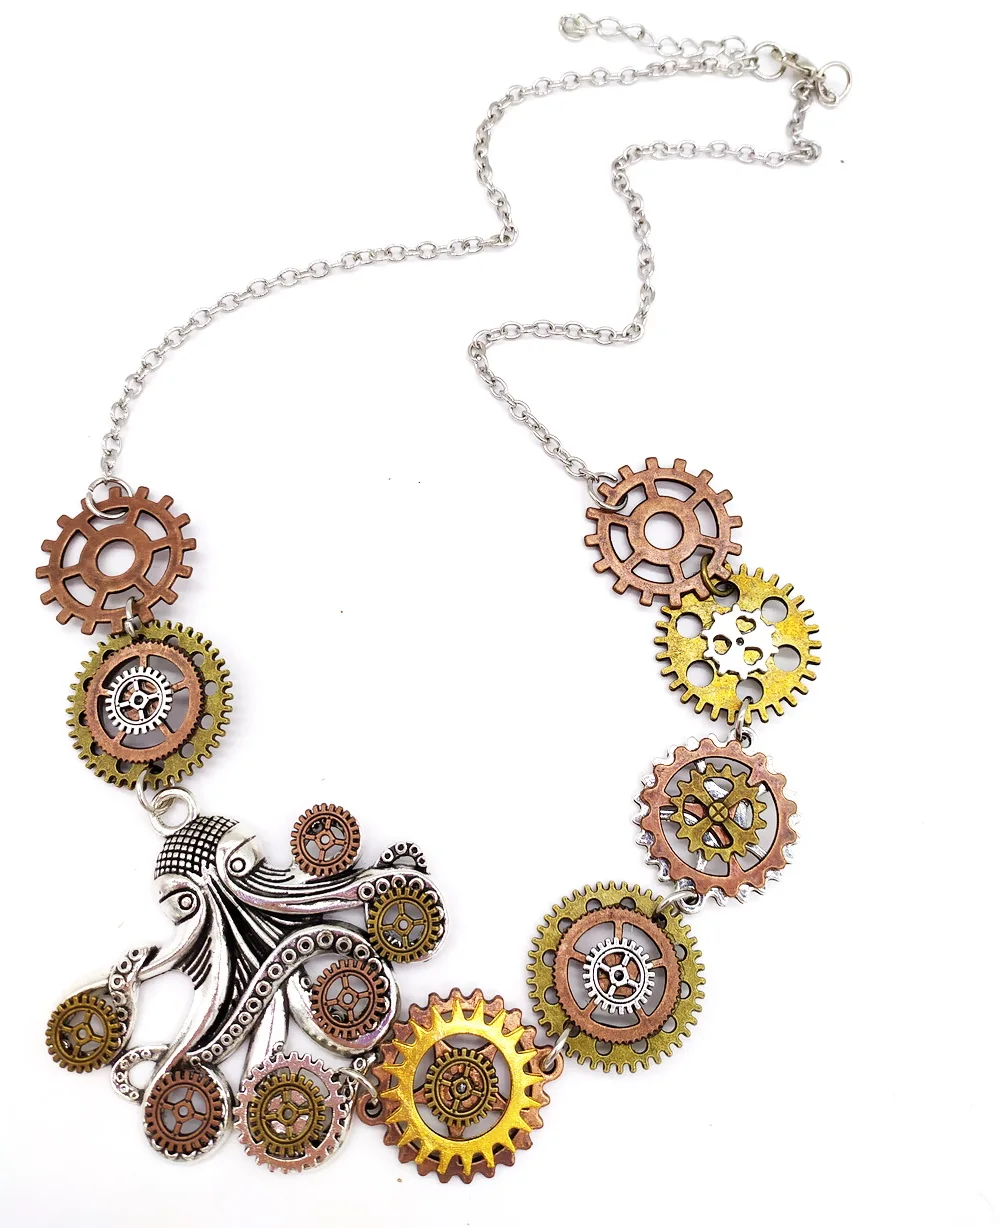 New Original Design Octopus Gears Claws with Various Gears Vintage Industrial Steampunk Necklace